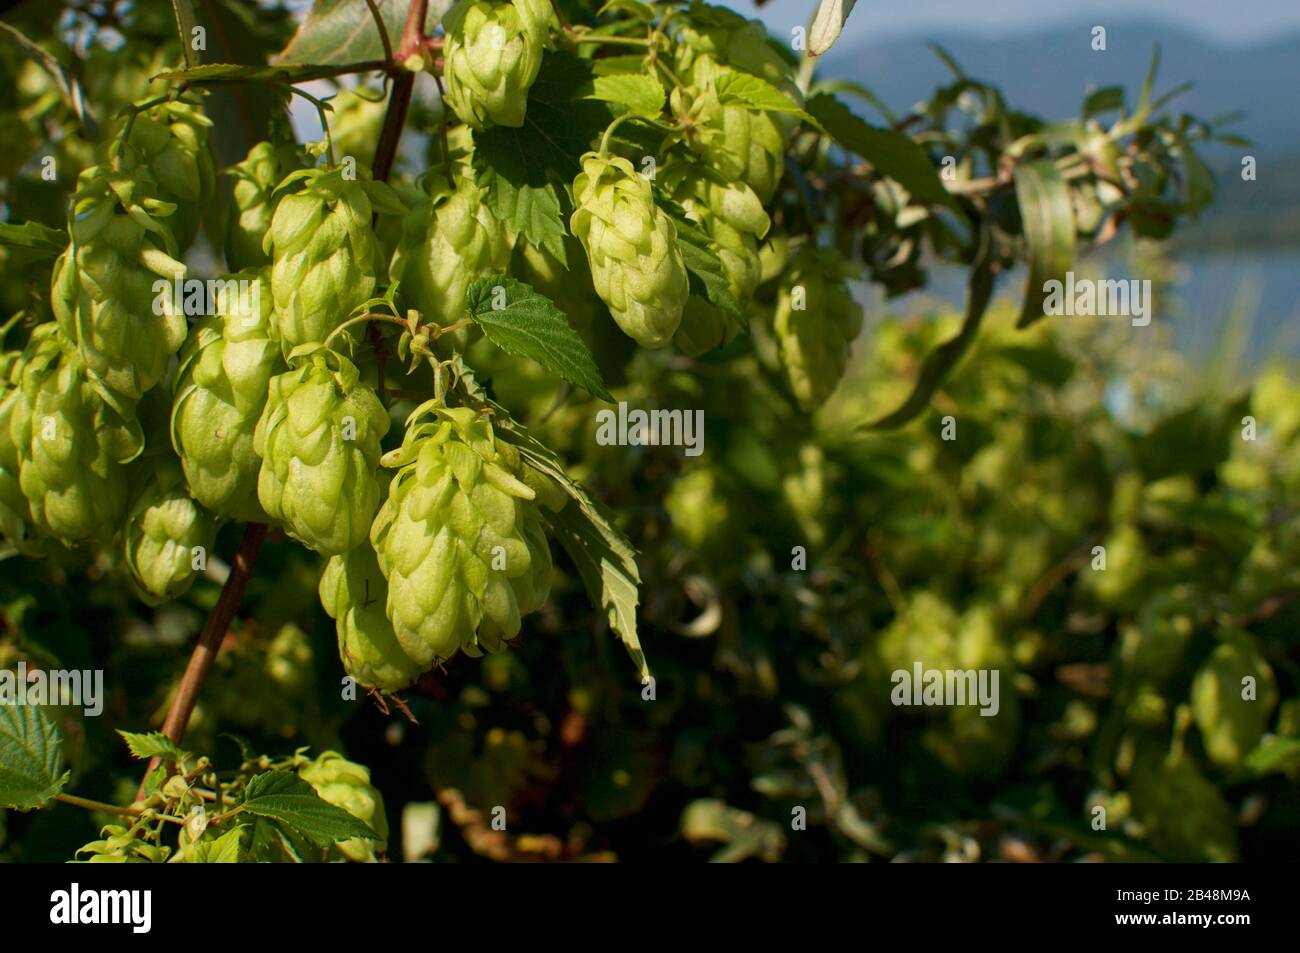 Close up picture of many hop cones hanging from the plant during sunset Stock Photo